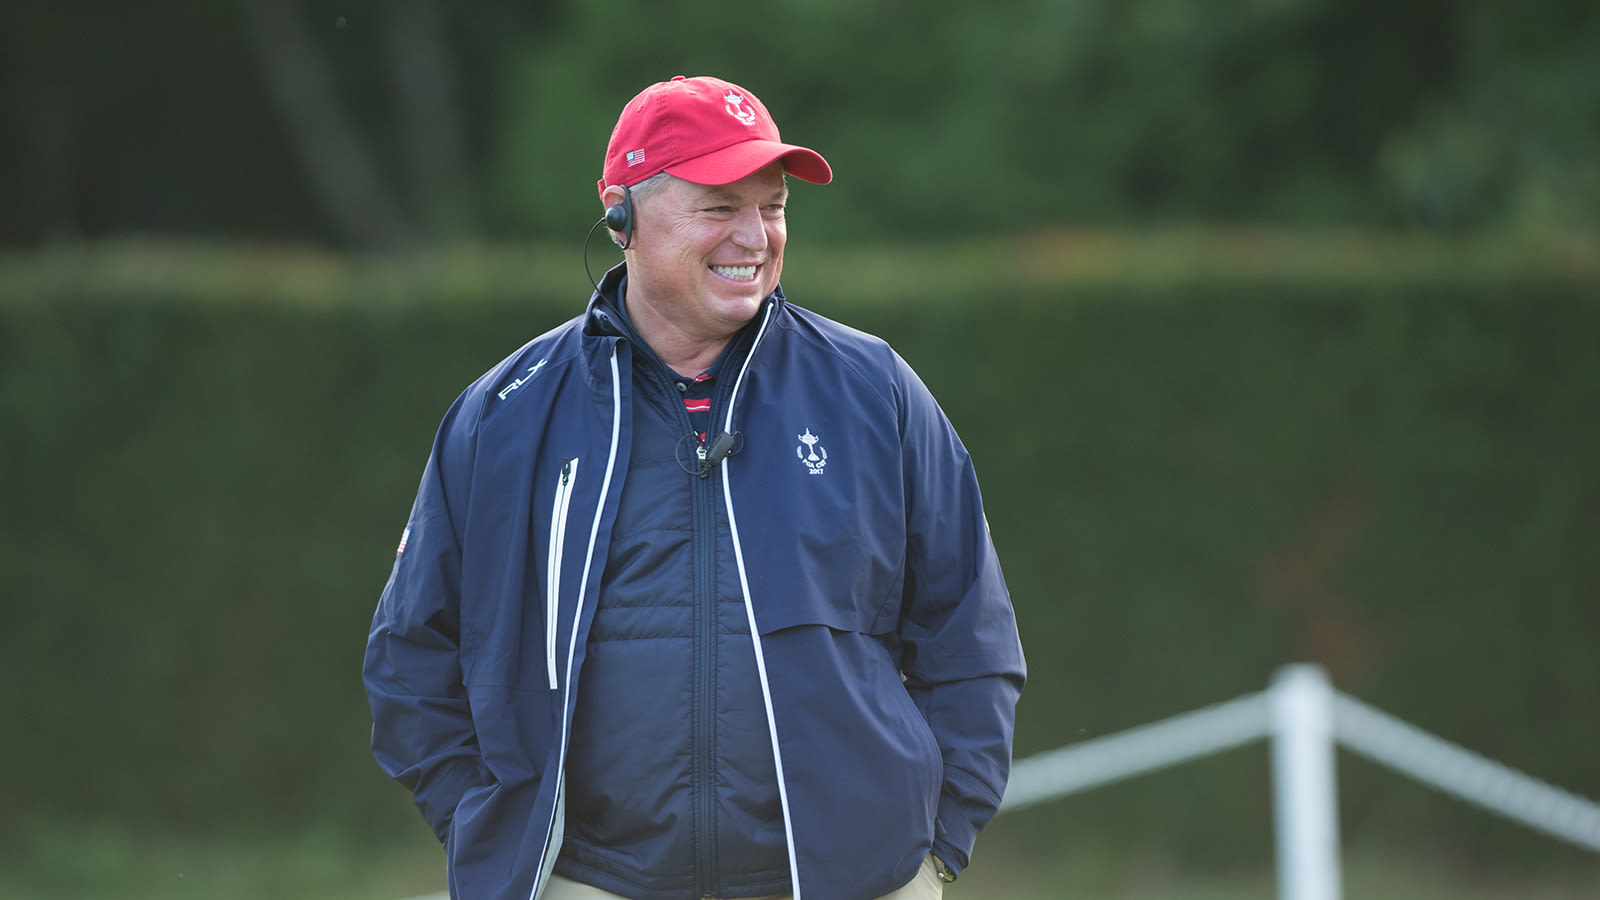 Jim Richerson during a Four Ball Match for the 28th PGA Cup at Fox Hills Golf Club on September 16, 2017 in Ottershaw, Surrey, England. (Traci Edwards/PGA of America)